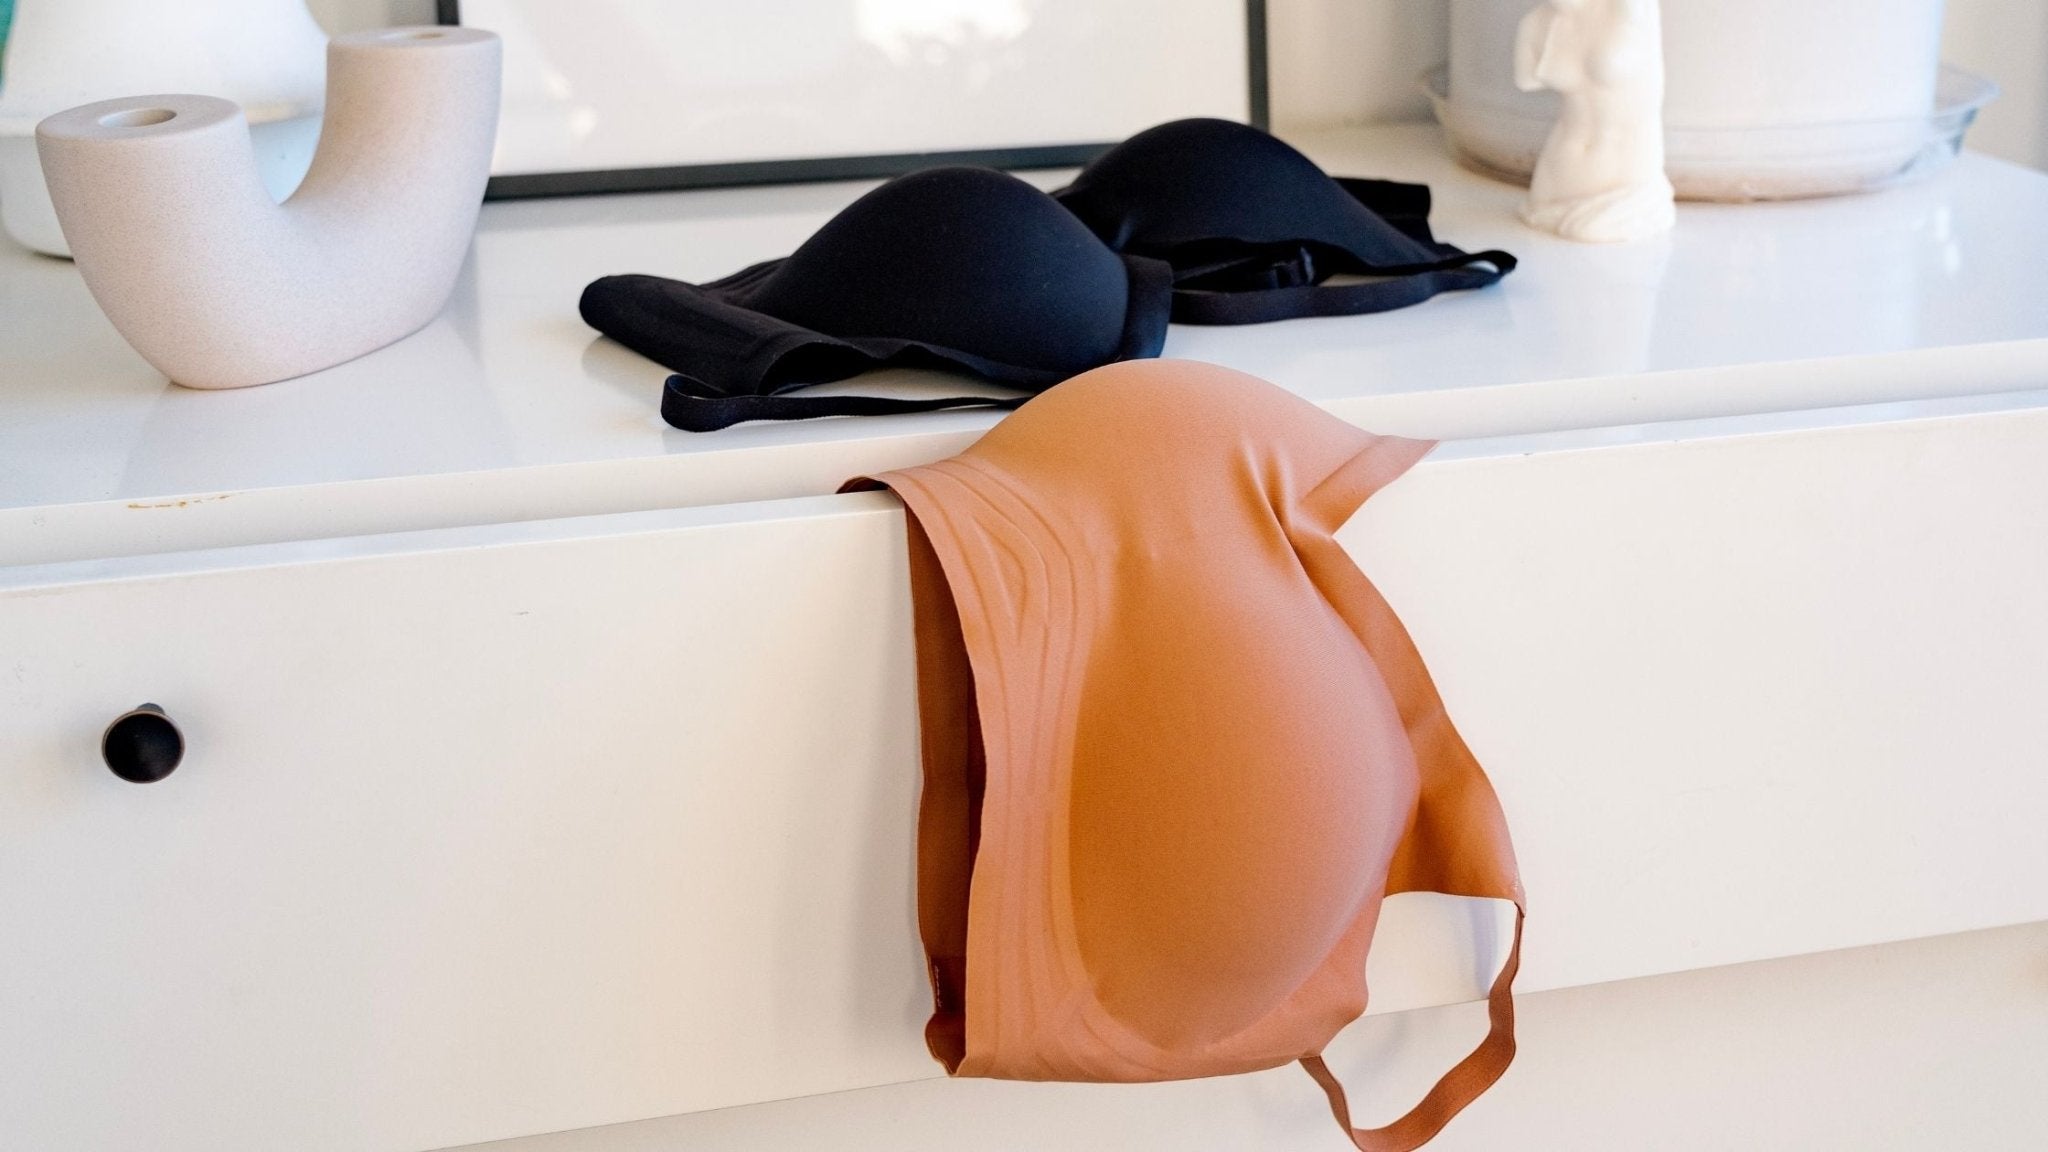 How do I know when to replace my bra?